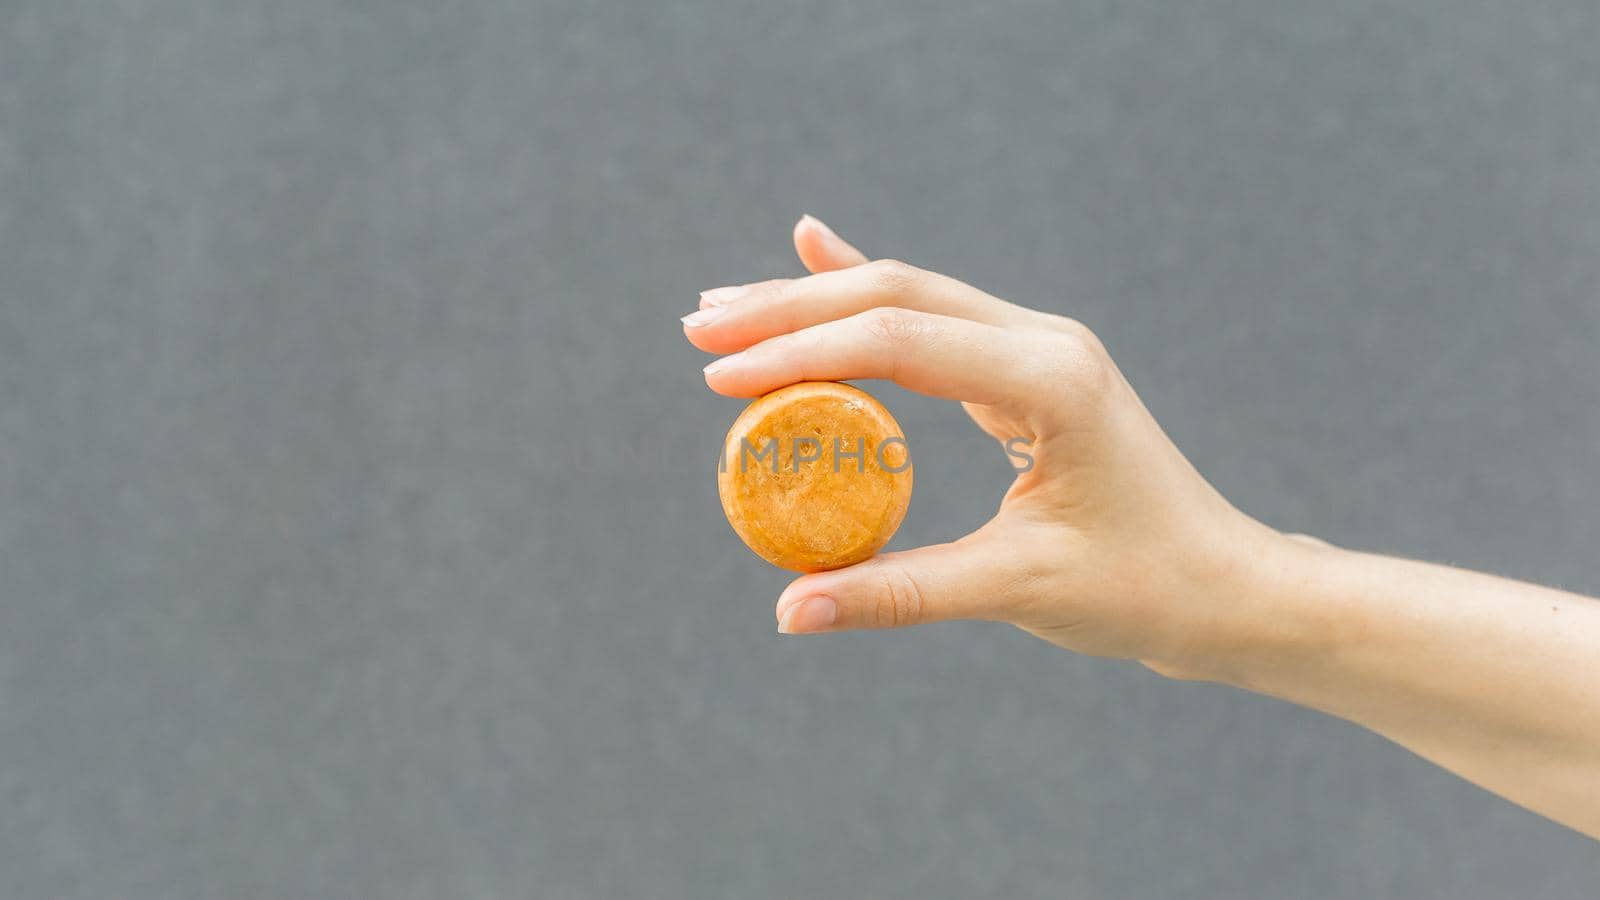 Woman hands holding organic soap or solid shampoo with no packaging over gray background. Healthy lifestyle, beauty, skin care, Zero waste concept. Copy Space for text